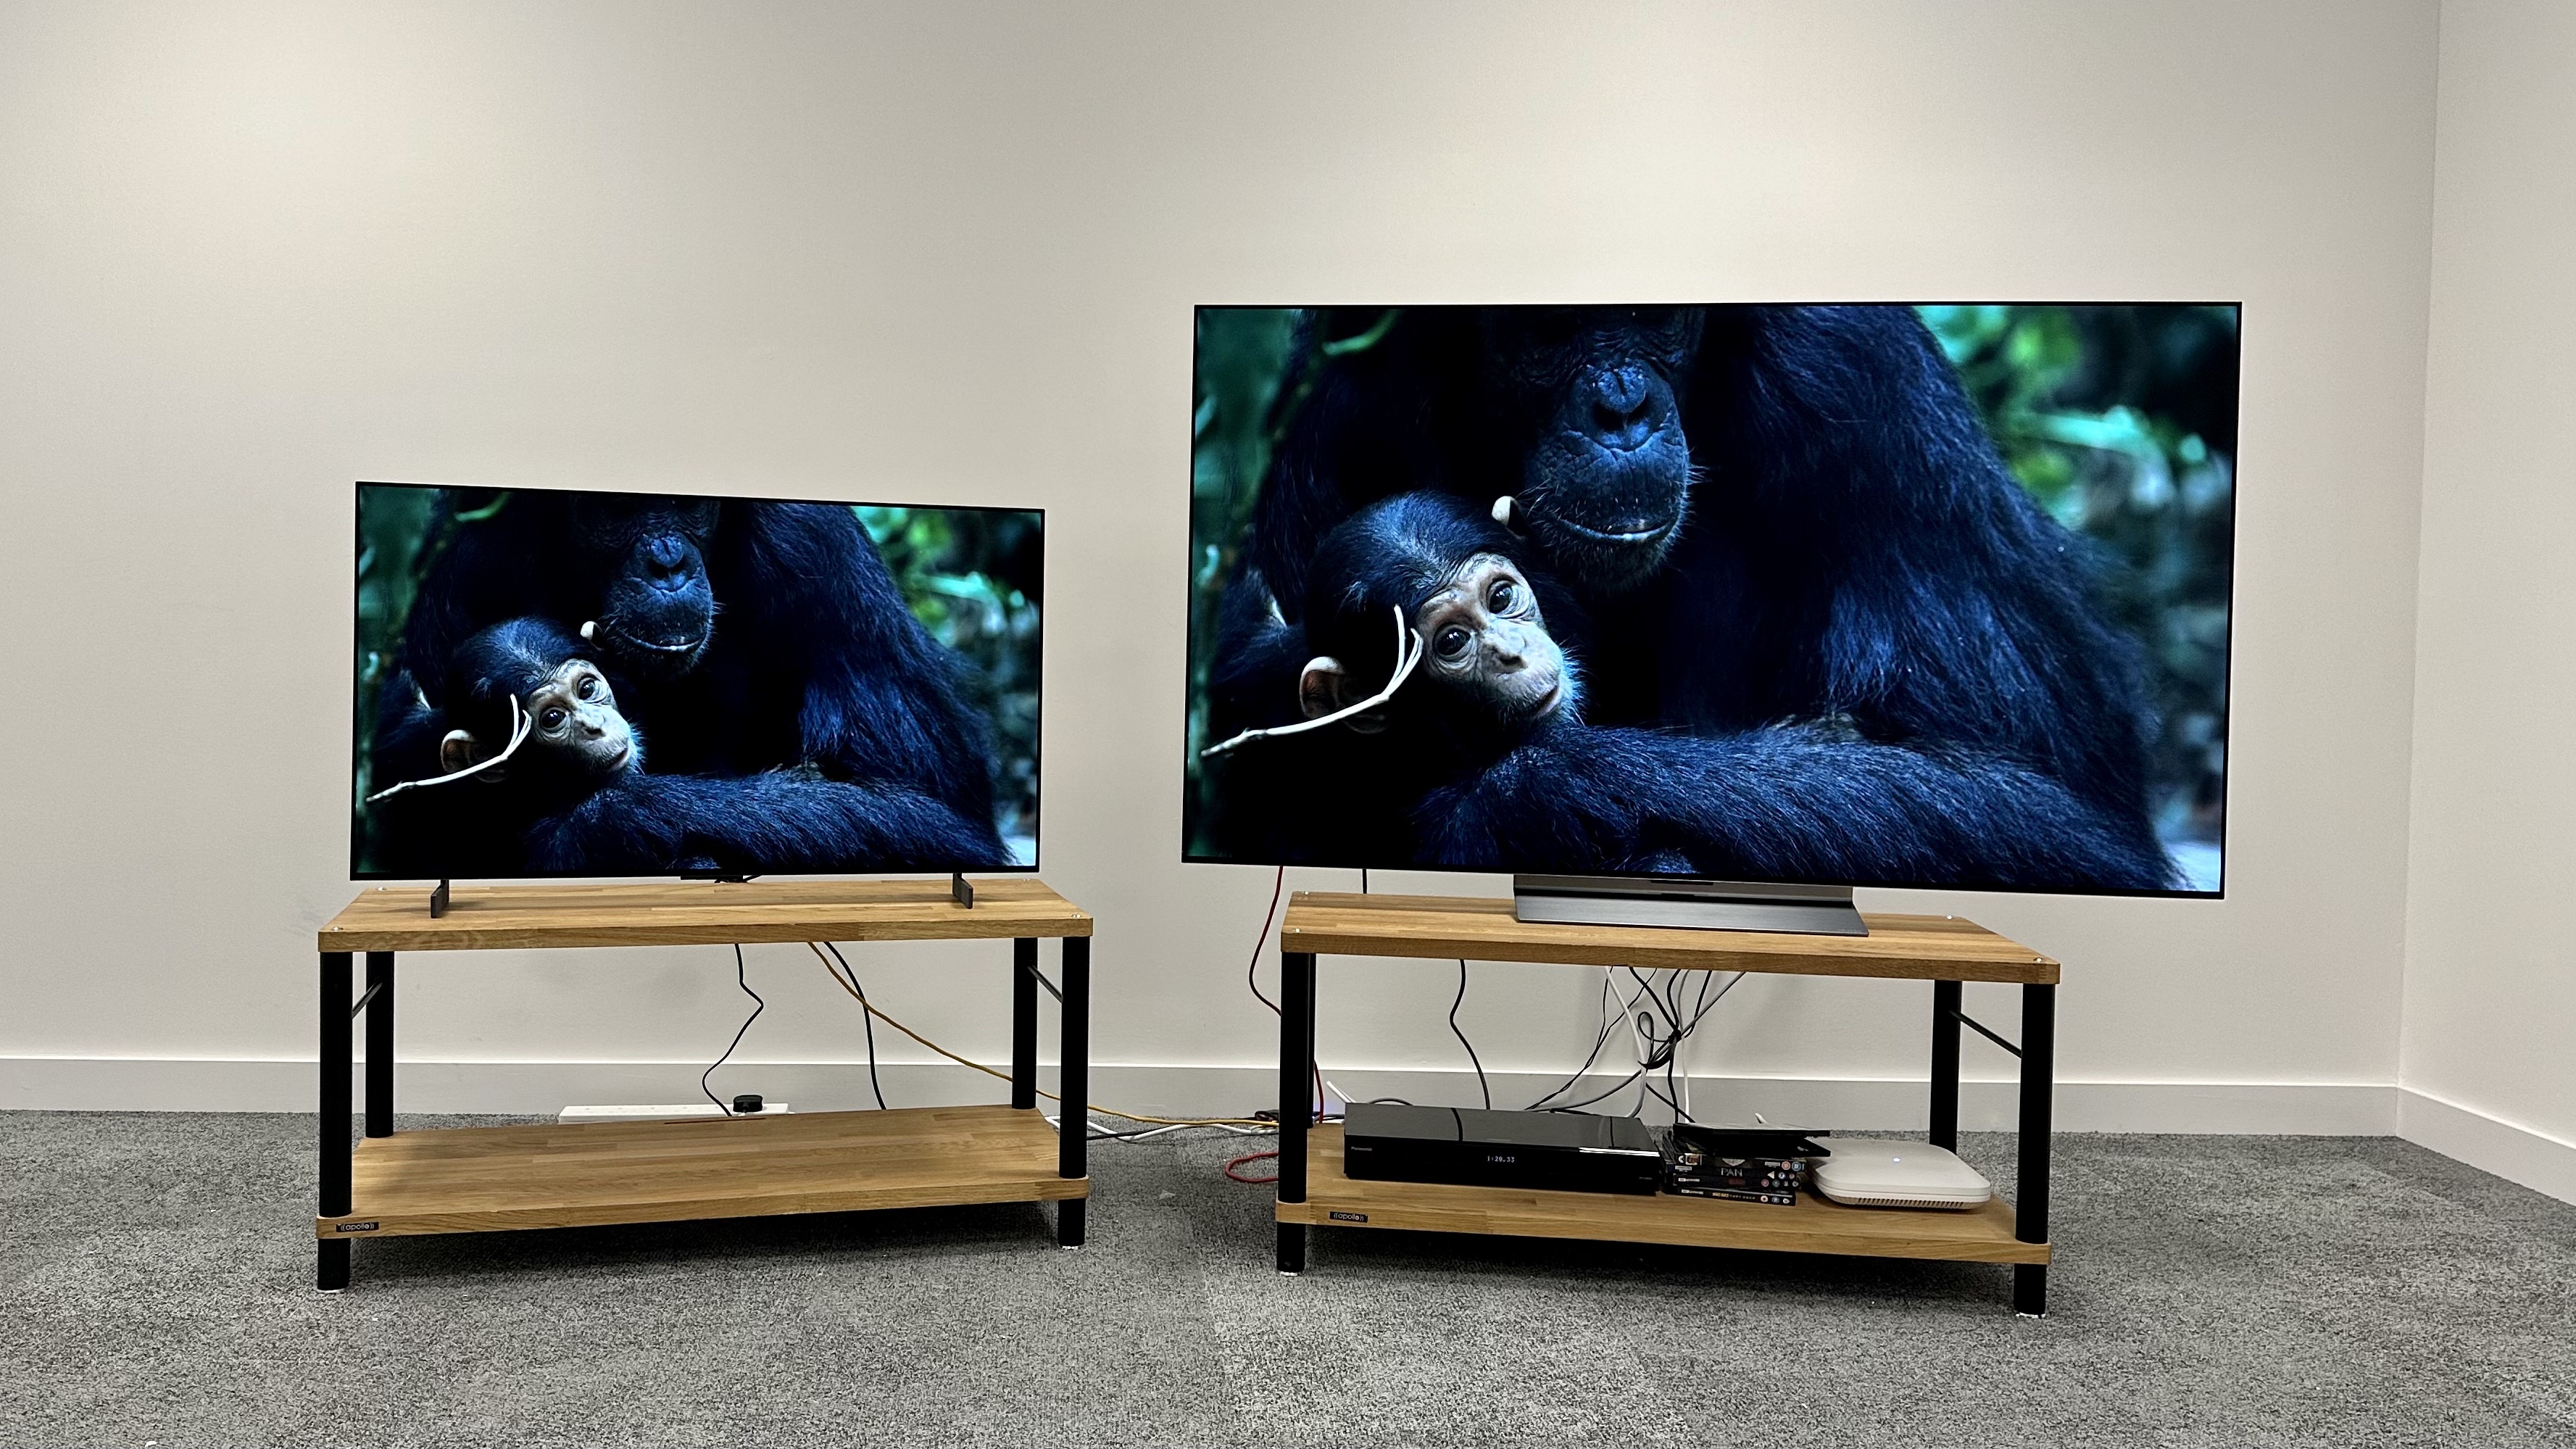 I watched the LG G3 and C3 OLED TV side-by-side — here's the winner